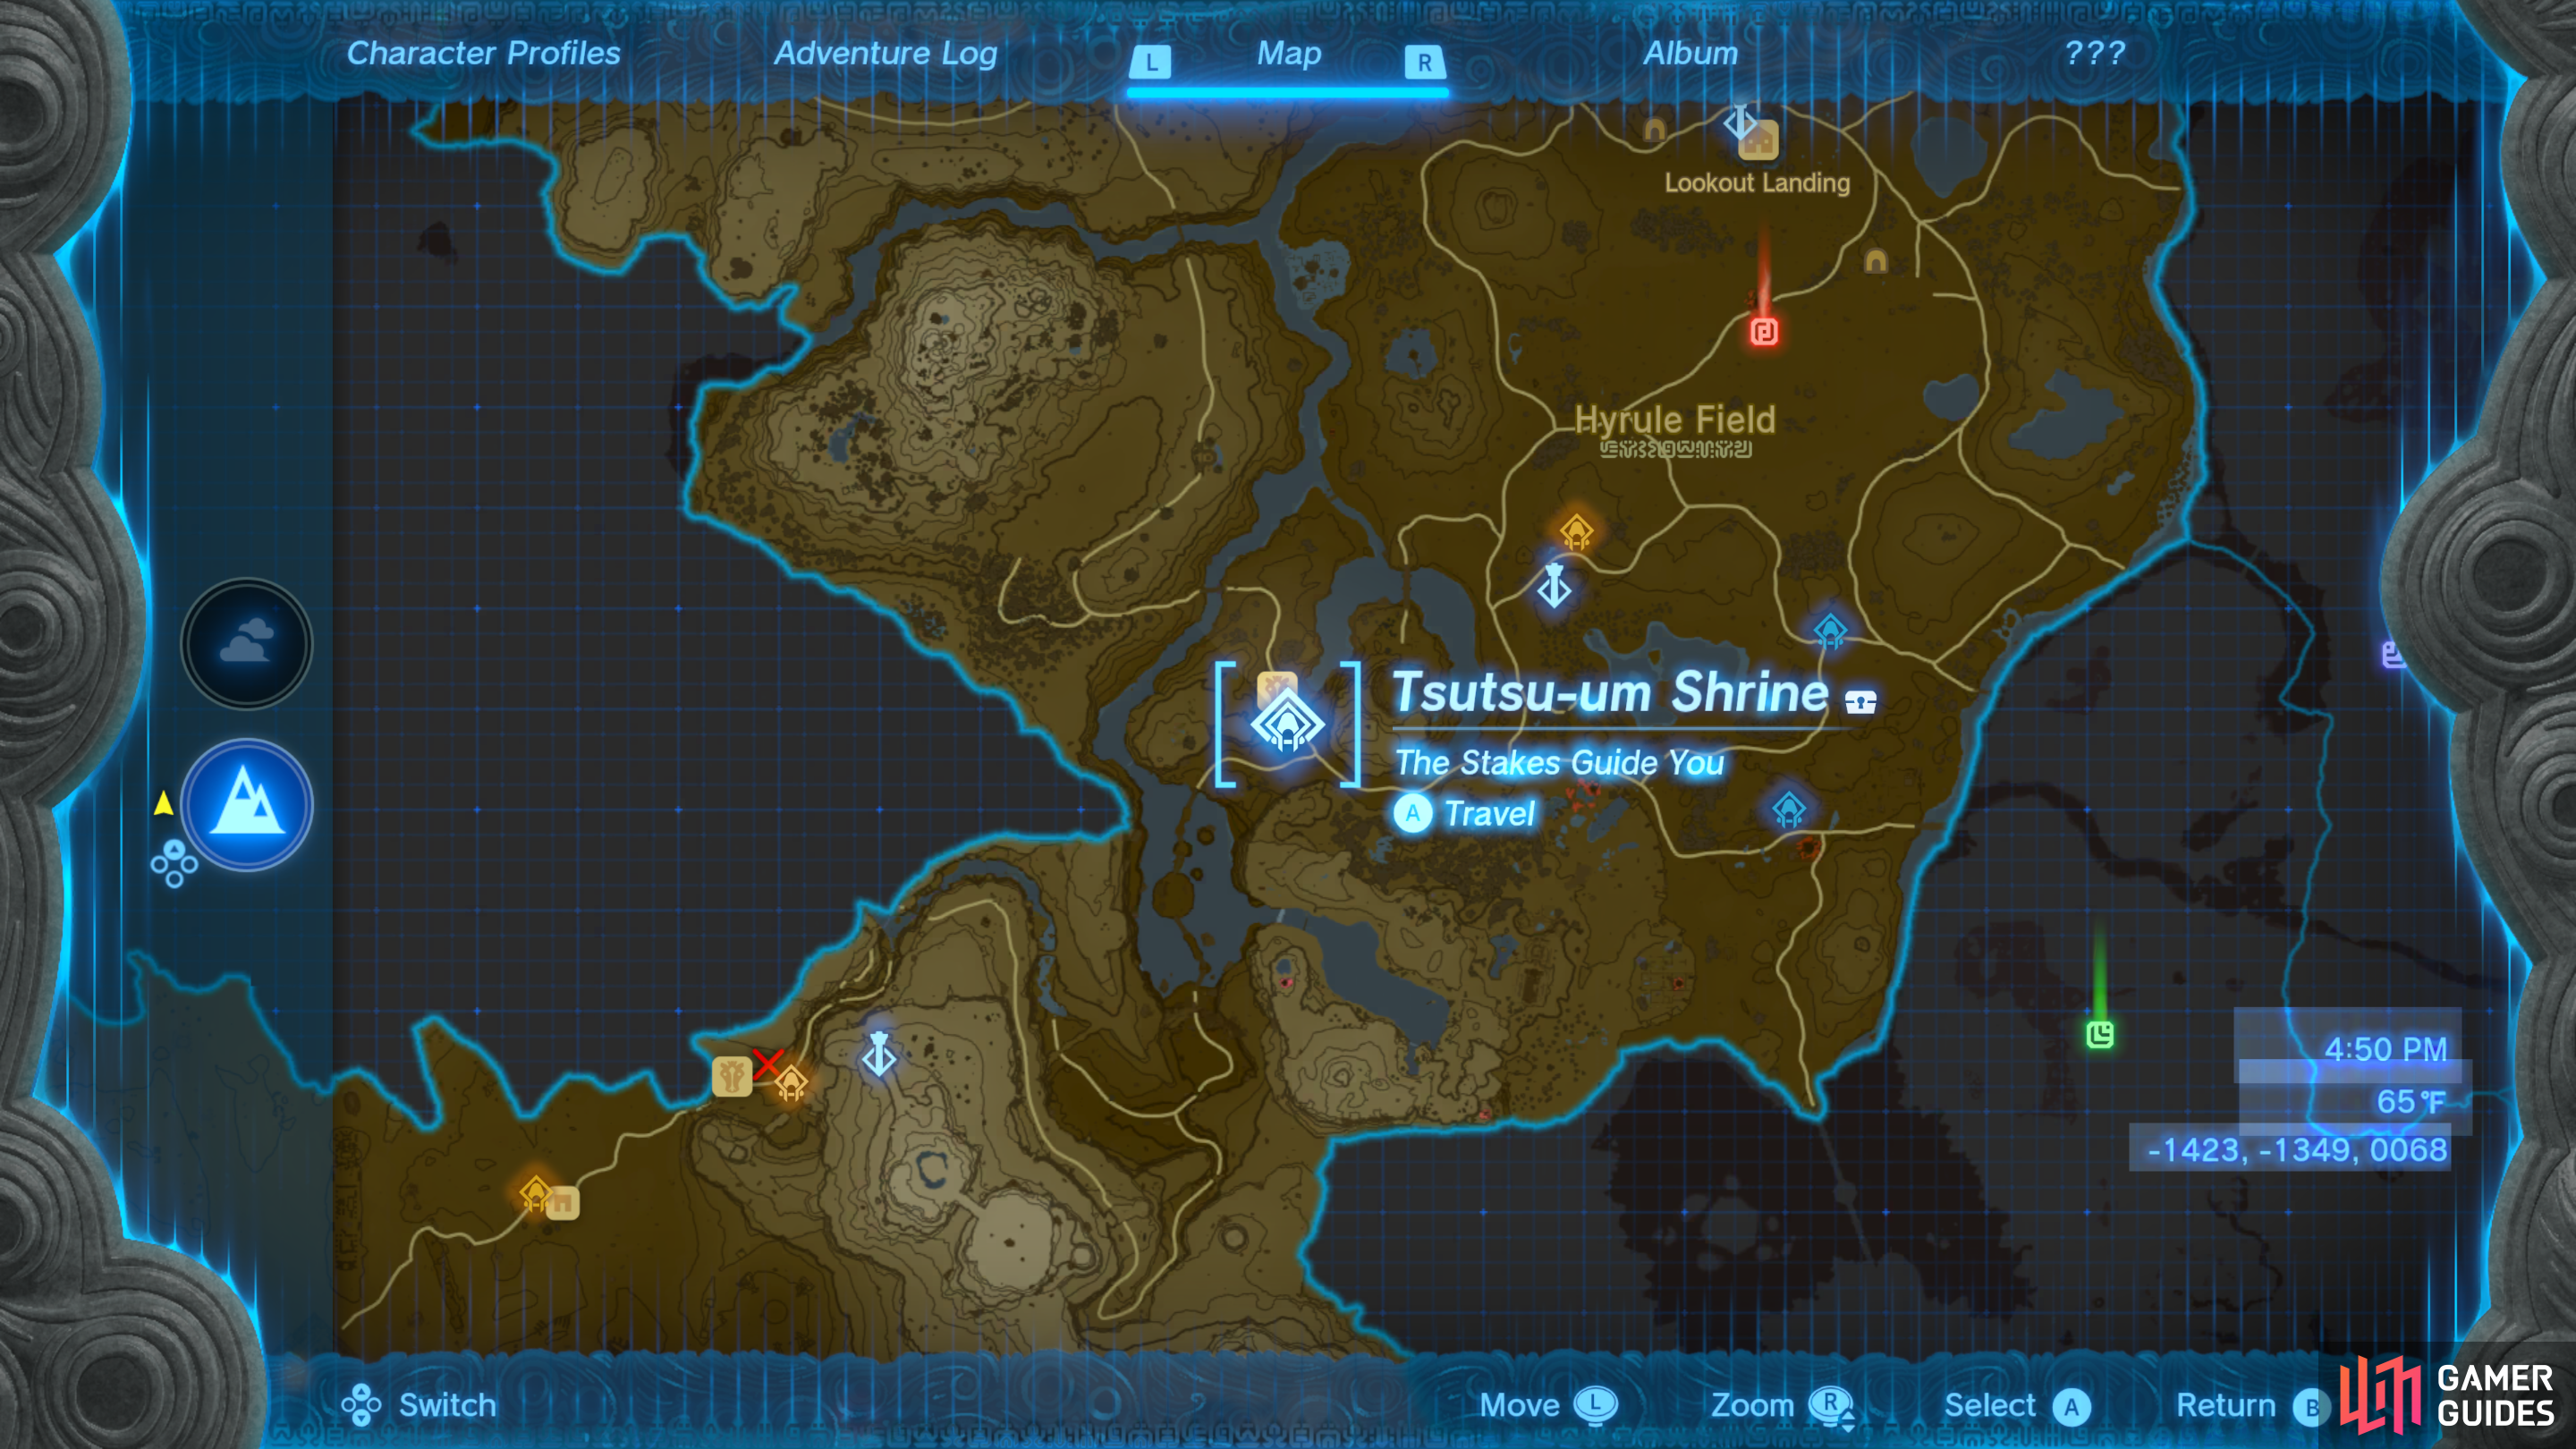 Tsutsu-um Shrine can be found along the southwestern reaches of Central Hyrule.